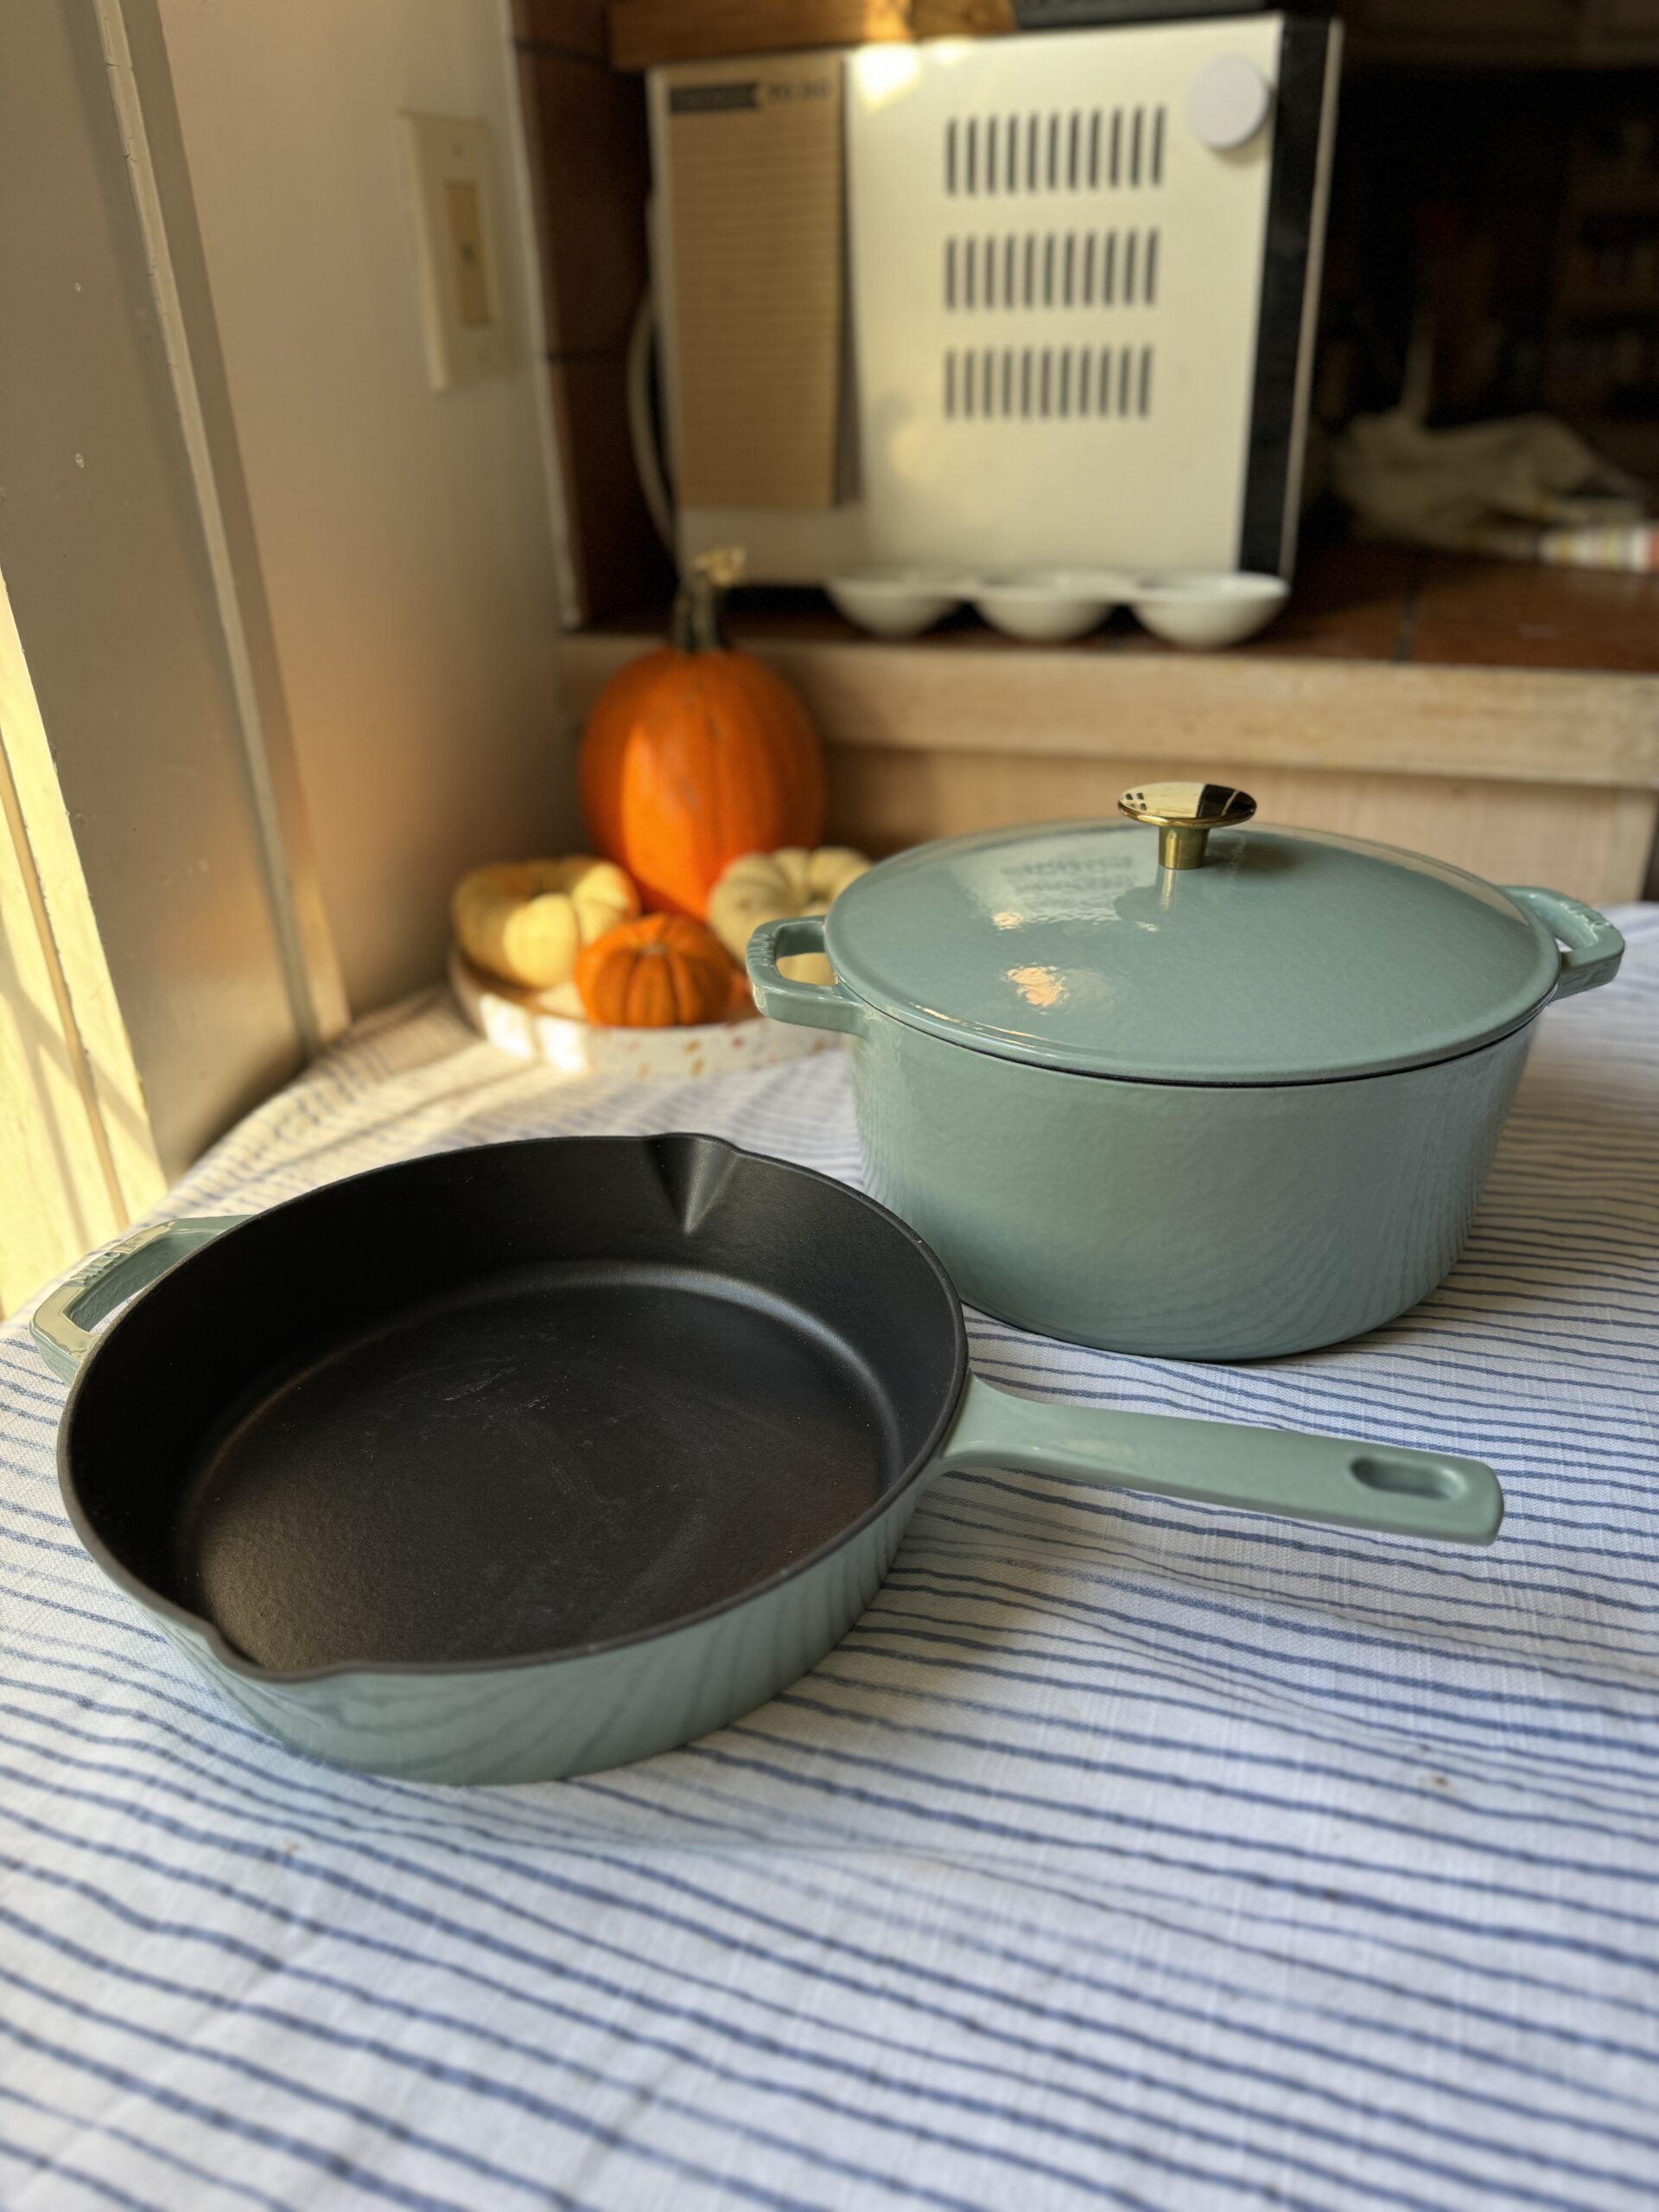 Your Guide to Healthy (And Not So Healthy) Cookware - Greenopedia